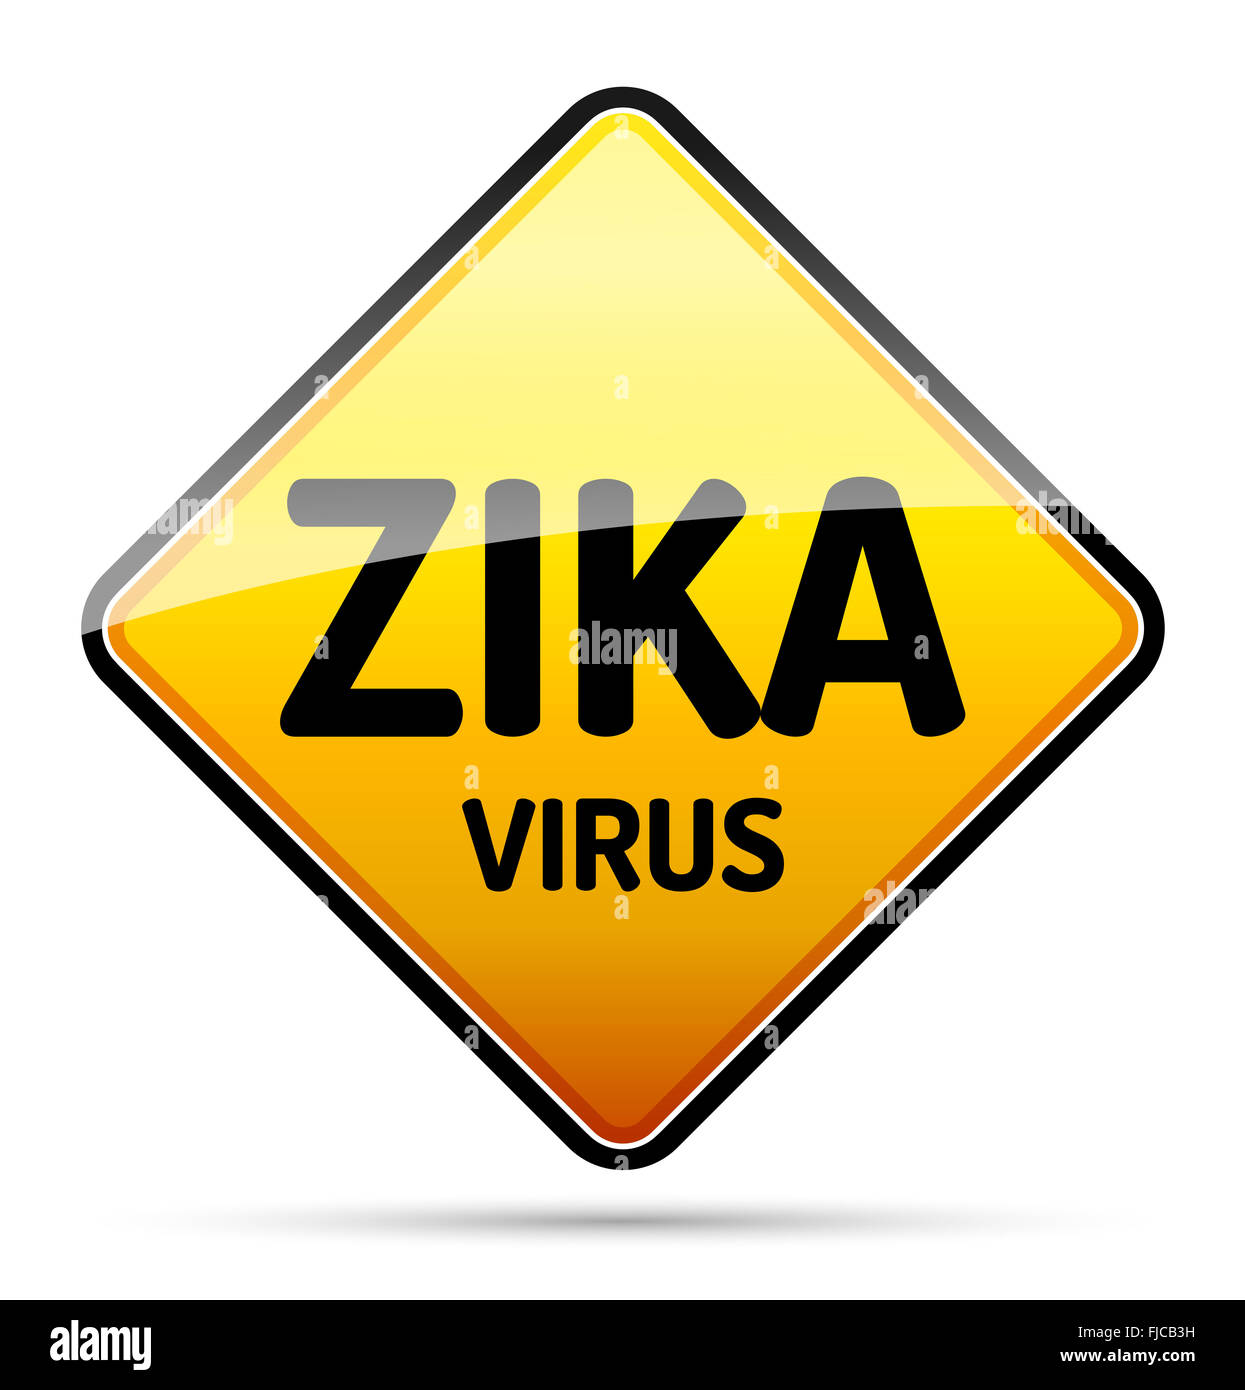 Zika virus warning sign with reflect and shadow on white background. Isolated vector. Stock Photo